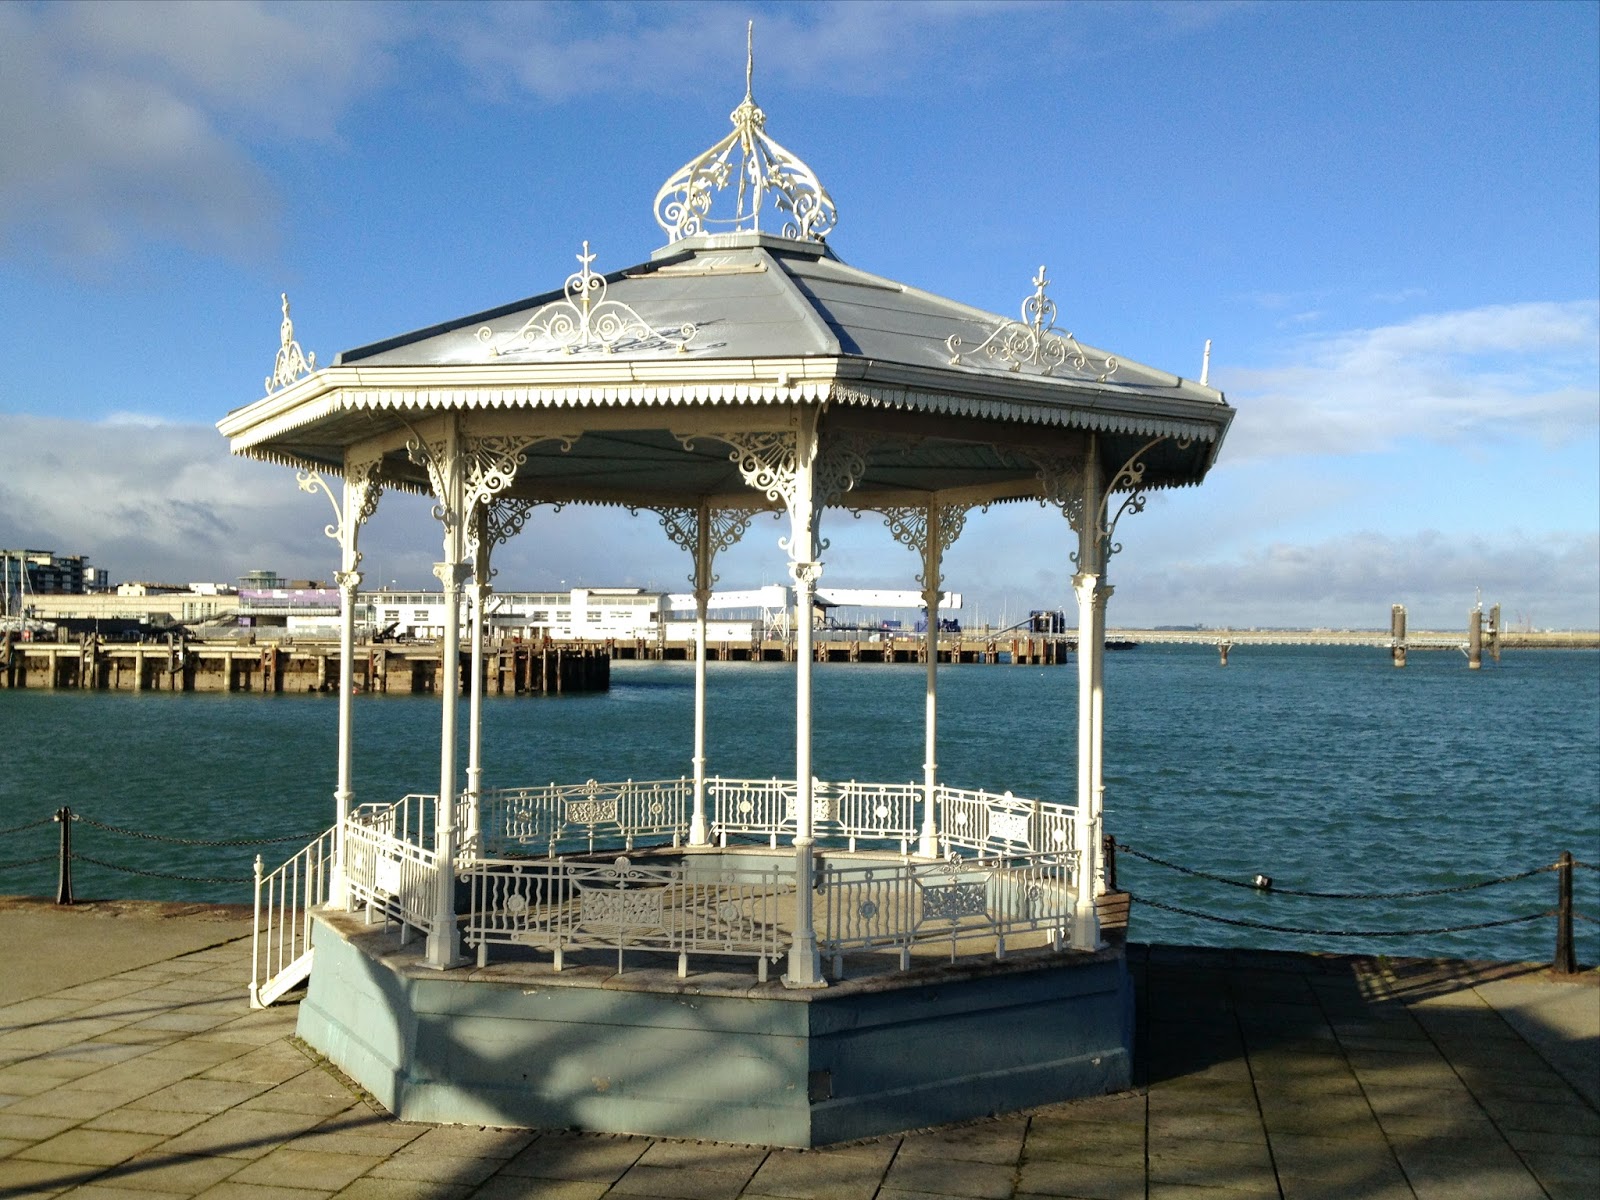 Gallery Photos of "Dun Laoghaire" .